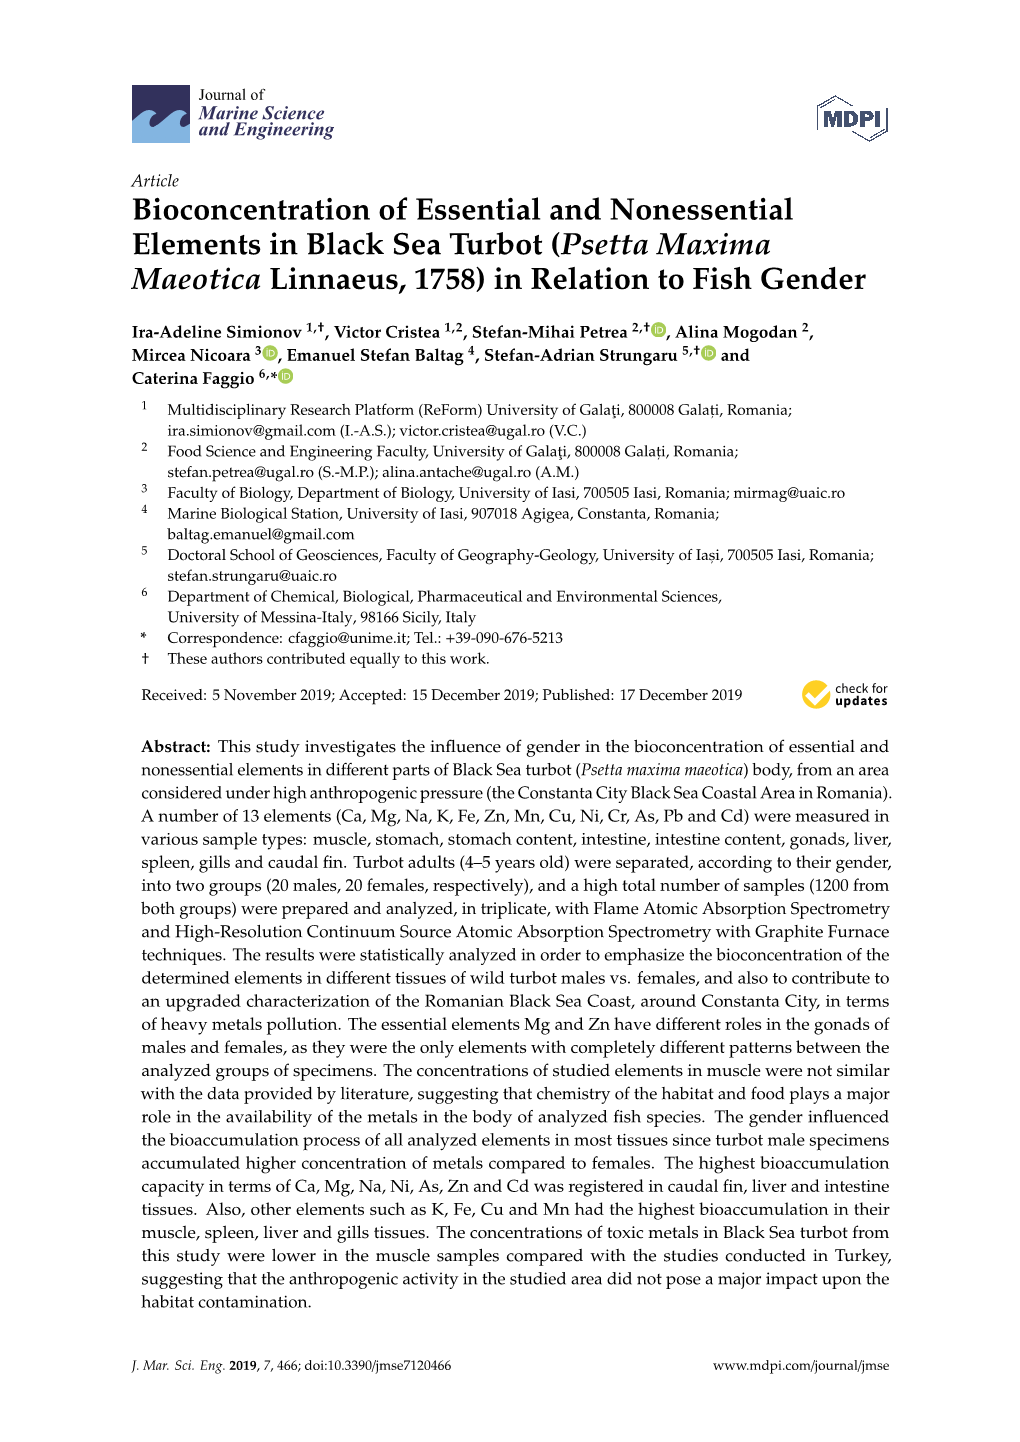 Bioconcentration of Essential and Nonessential Elements in Black Sea Turbot (Psetta Maxima Maeotica Linnaeus, 1758) in Relation to Fish Gender